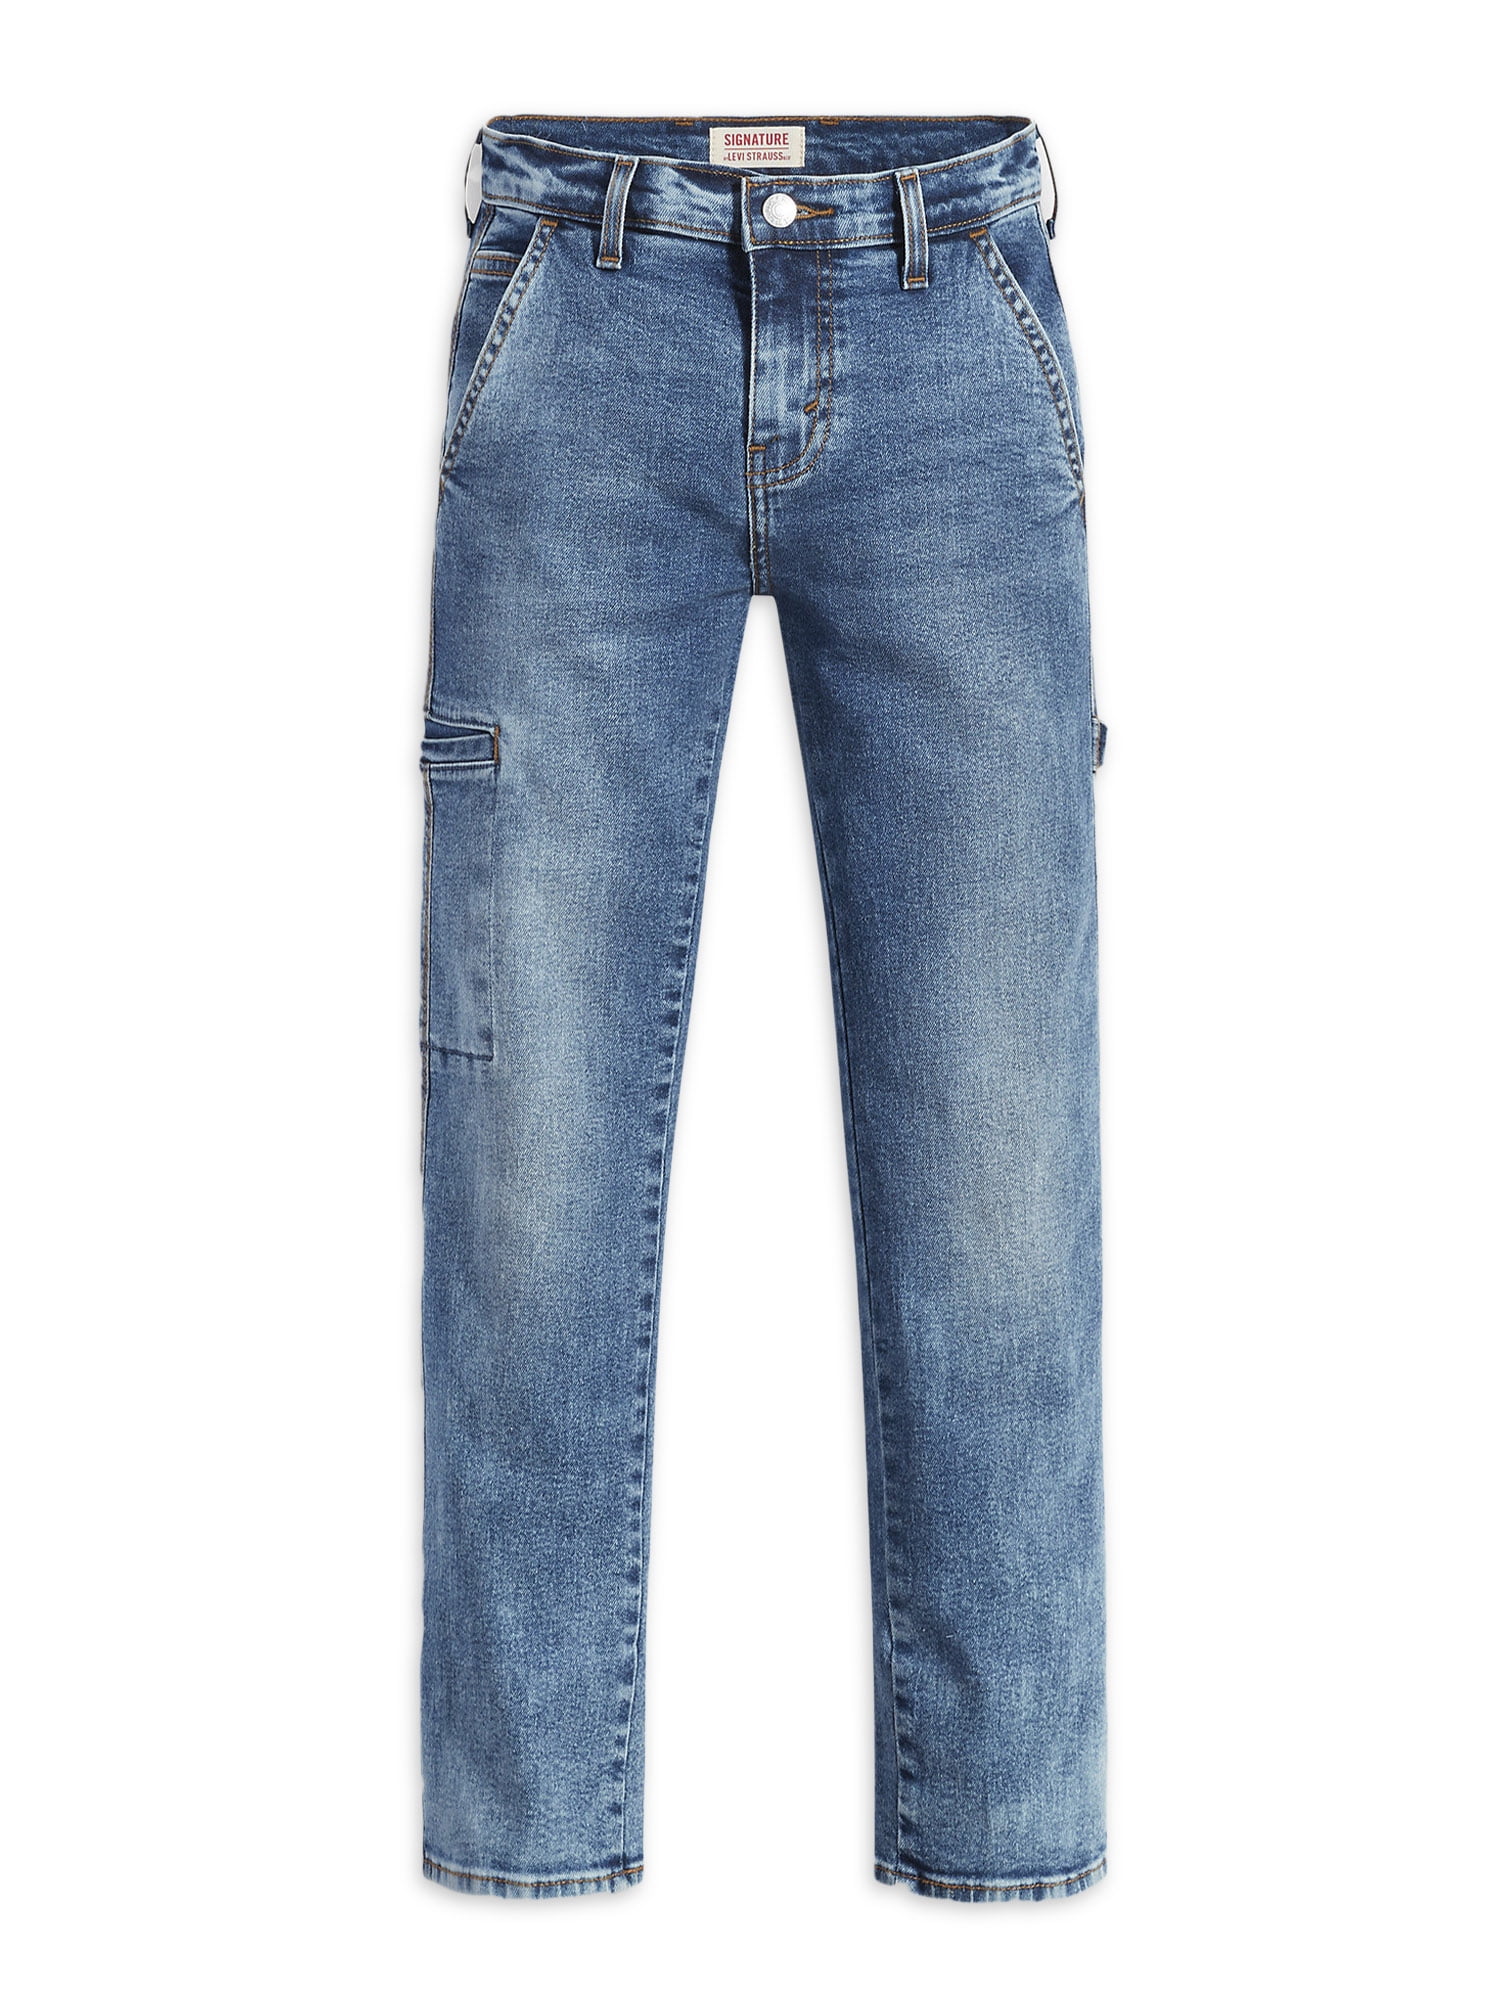 Signature By Levi Strauss & Co. Boys Loose Carpenter Jeans, Sizes 4-18